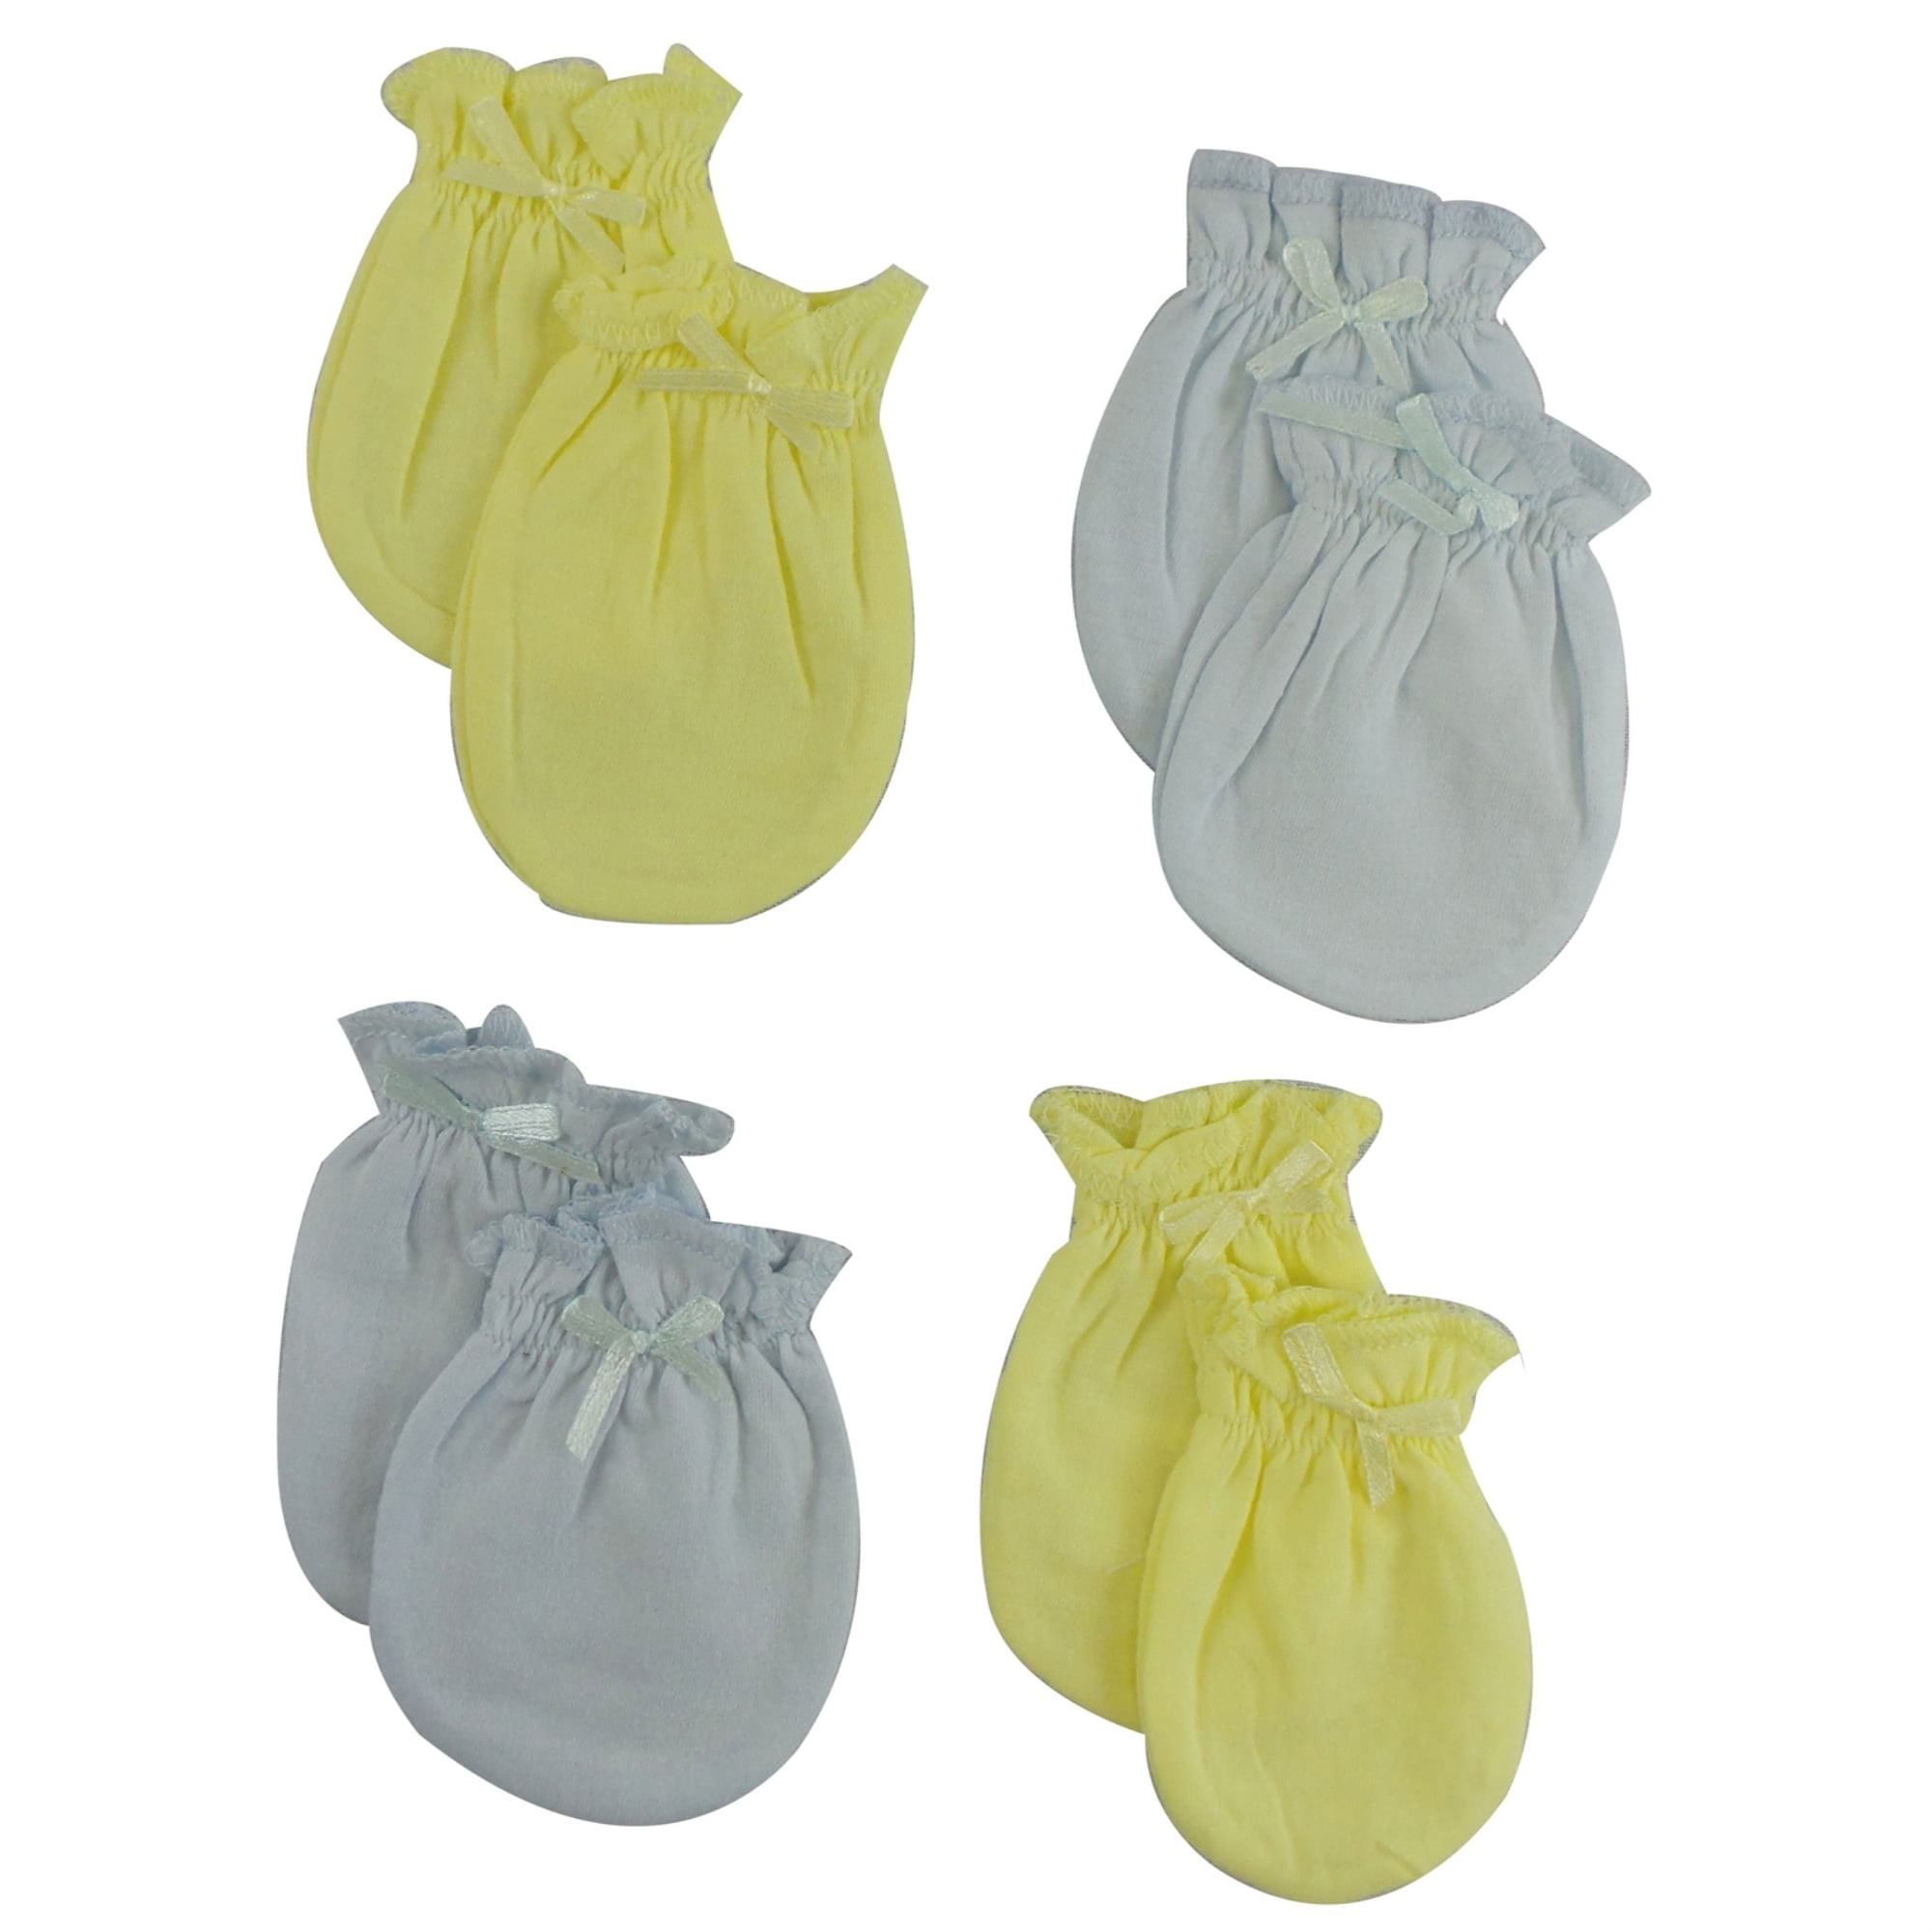 116-blue-yellow-4-pack Infant Mittens, Blue & Yellow - Pack Of 4